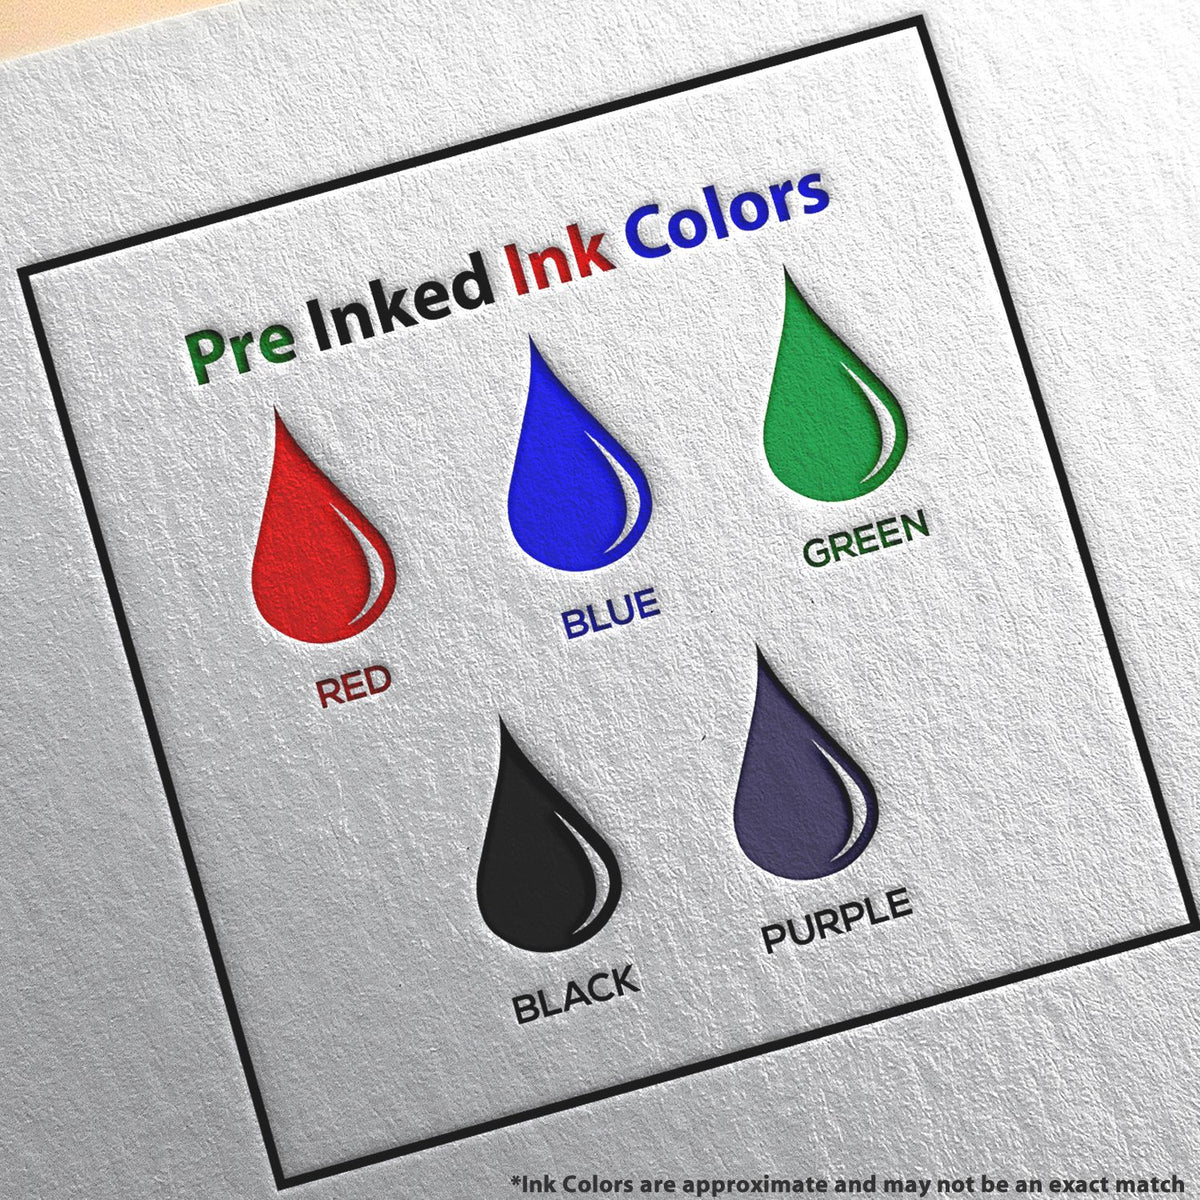 A picture showing the different ink colors or hues available for the Super Slim Oregon Notary Public Stamp product.